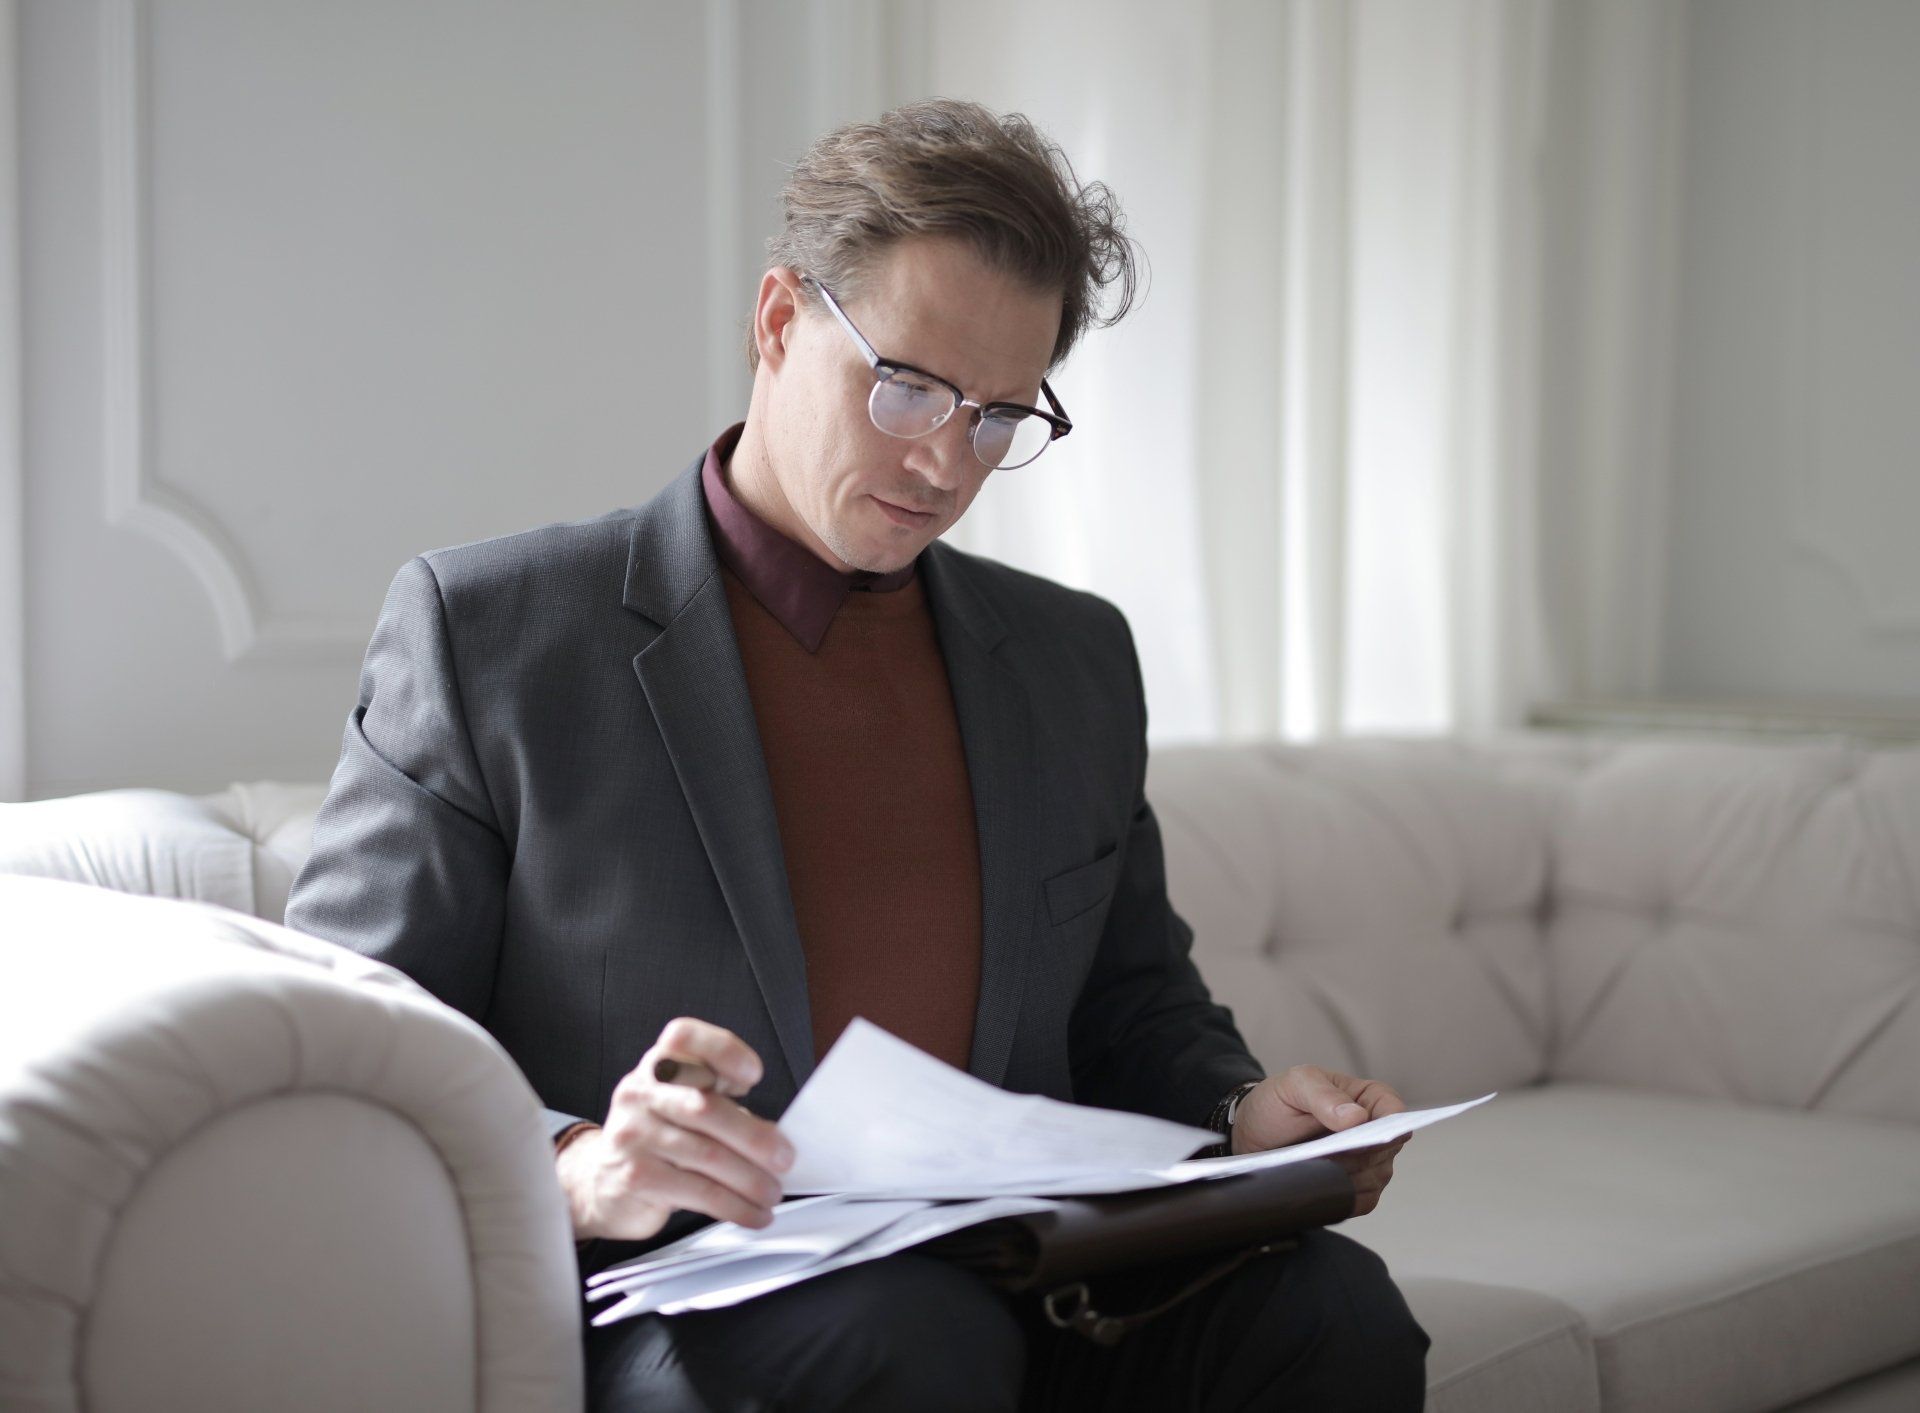 Intelligent looking man wearing glasses sat of sofa reviewing a document